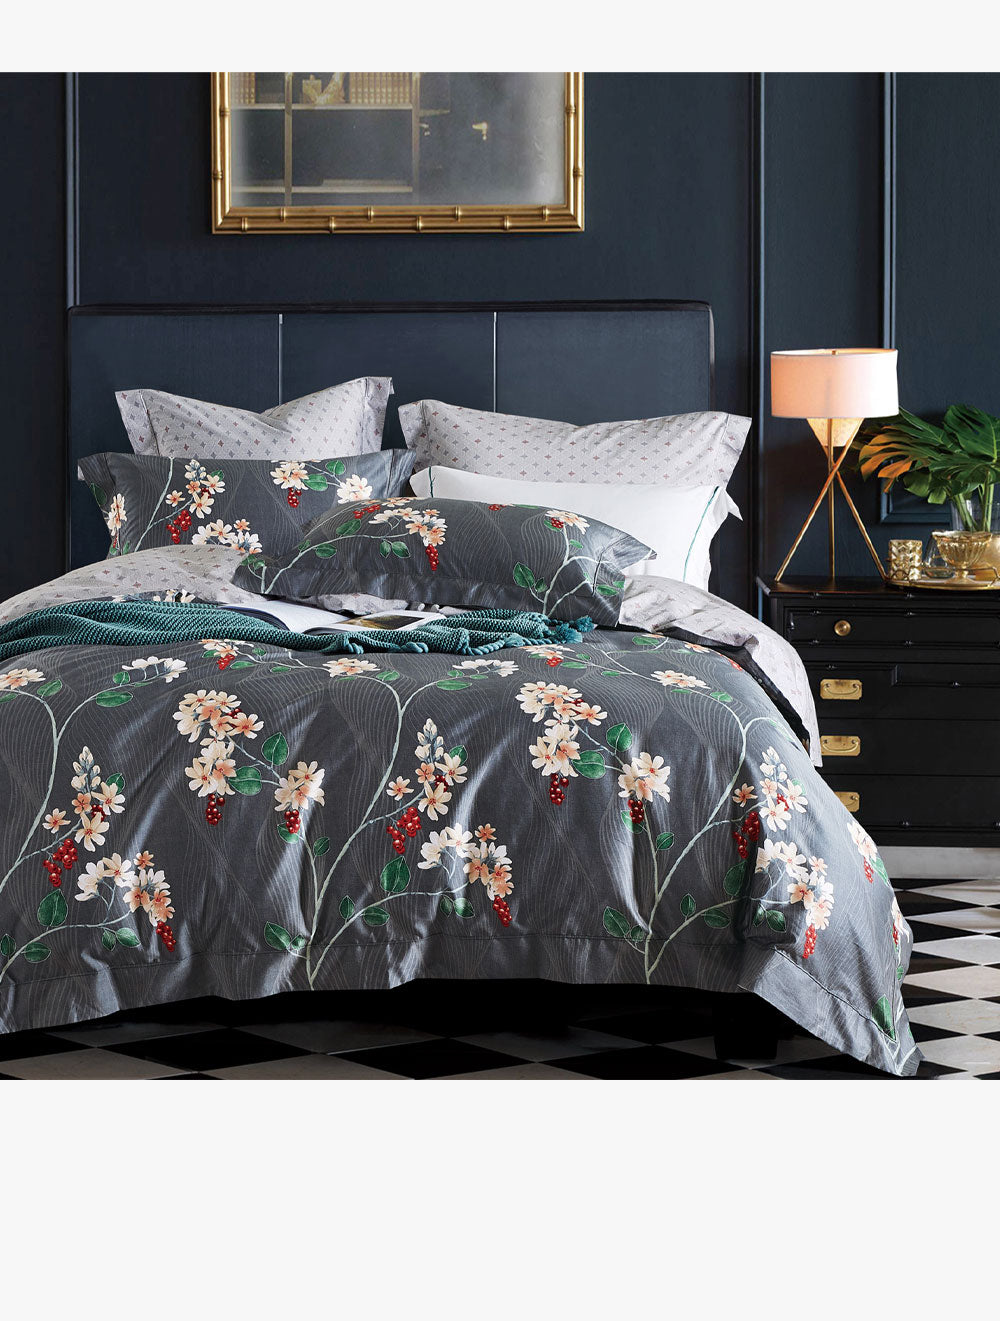 TUFT & QUILT BLOOMING BERRIES FITTED SHEET SET 160 CM X 200 CM